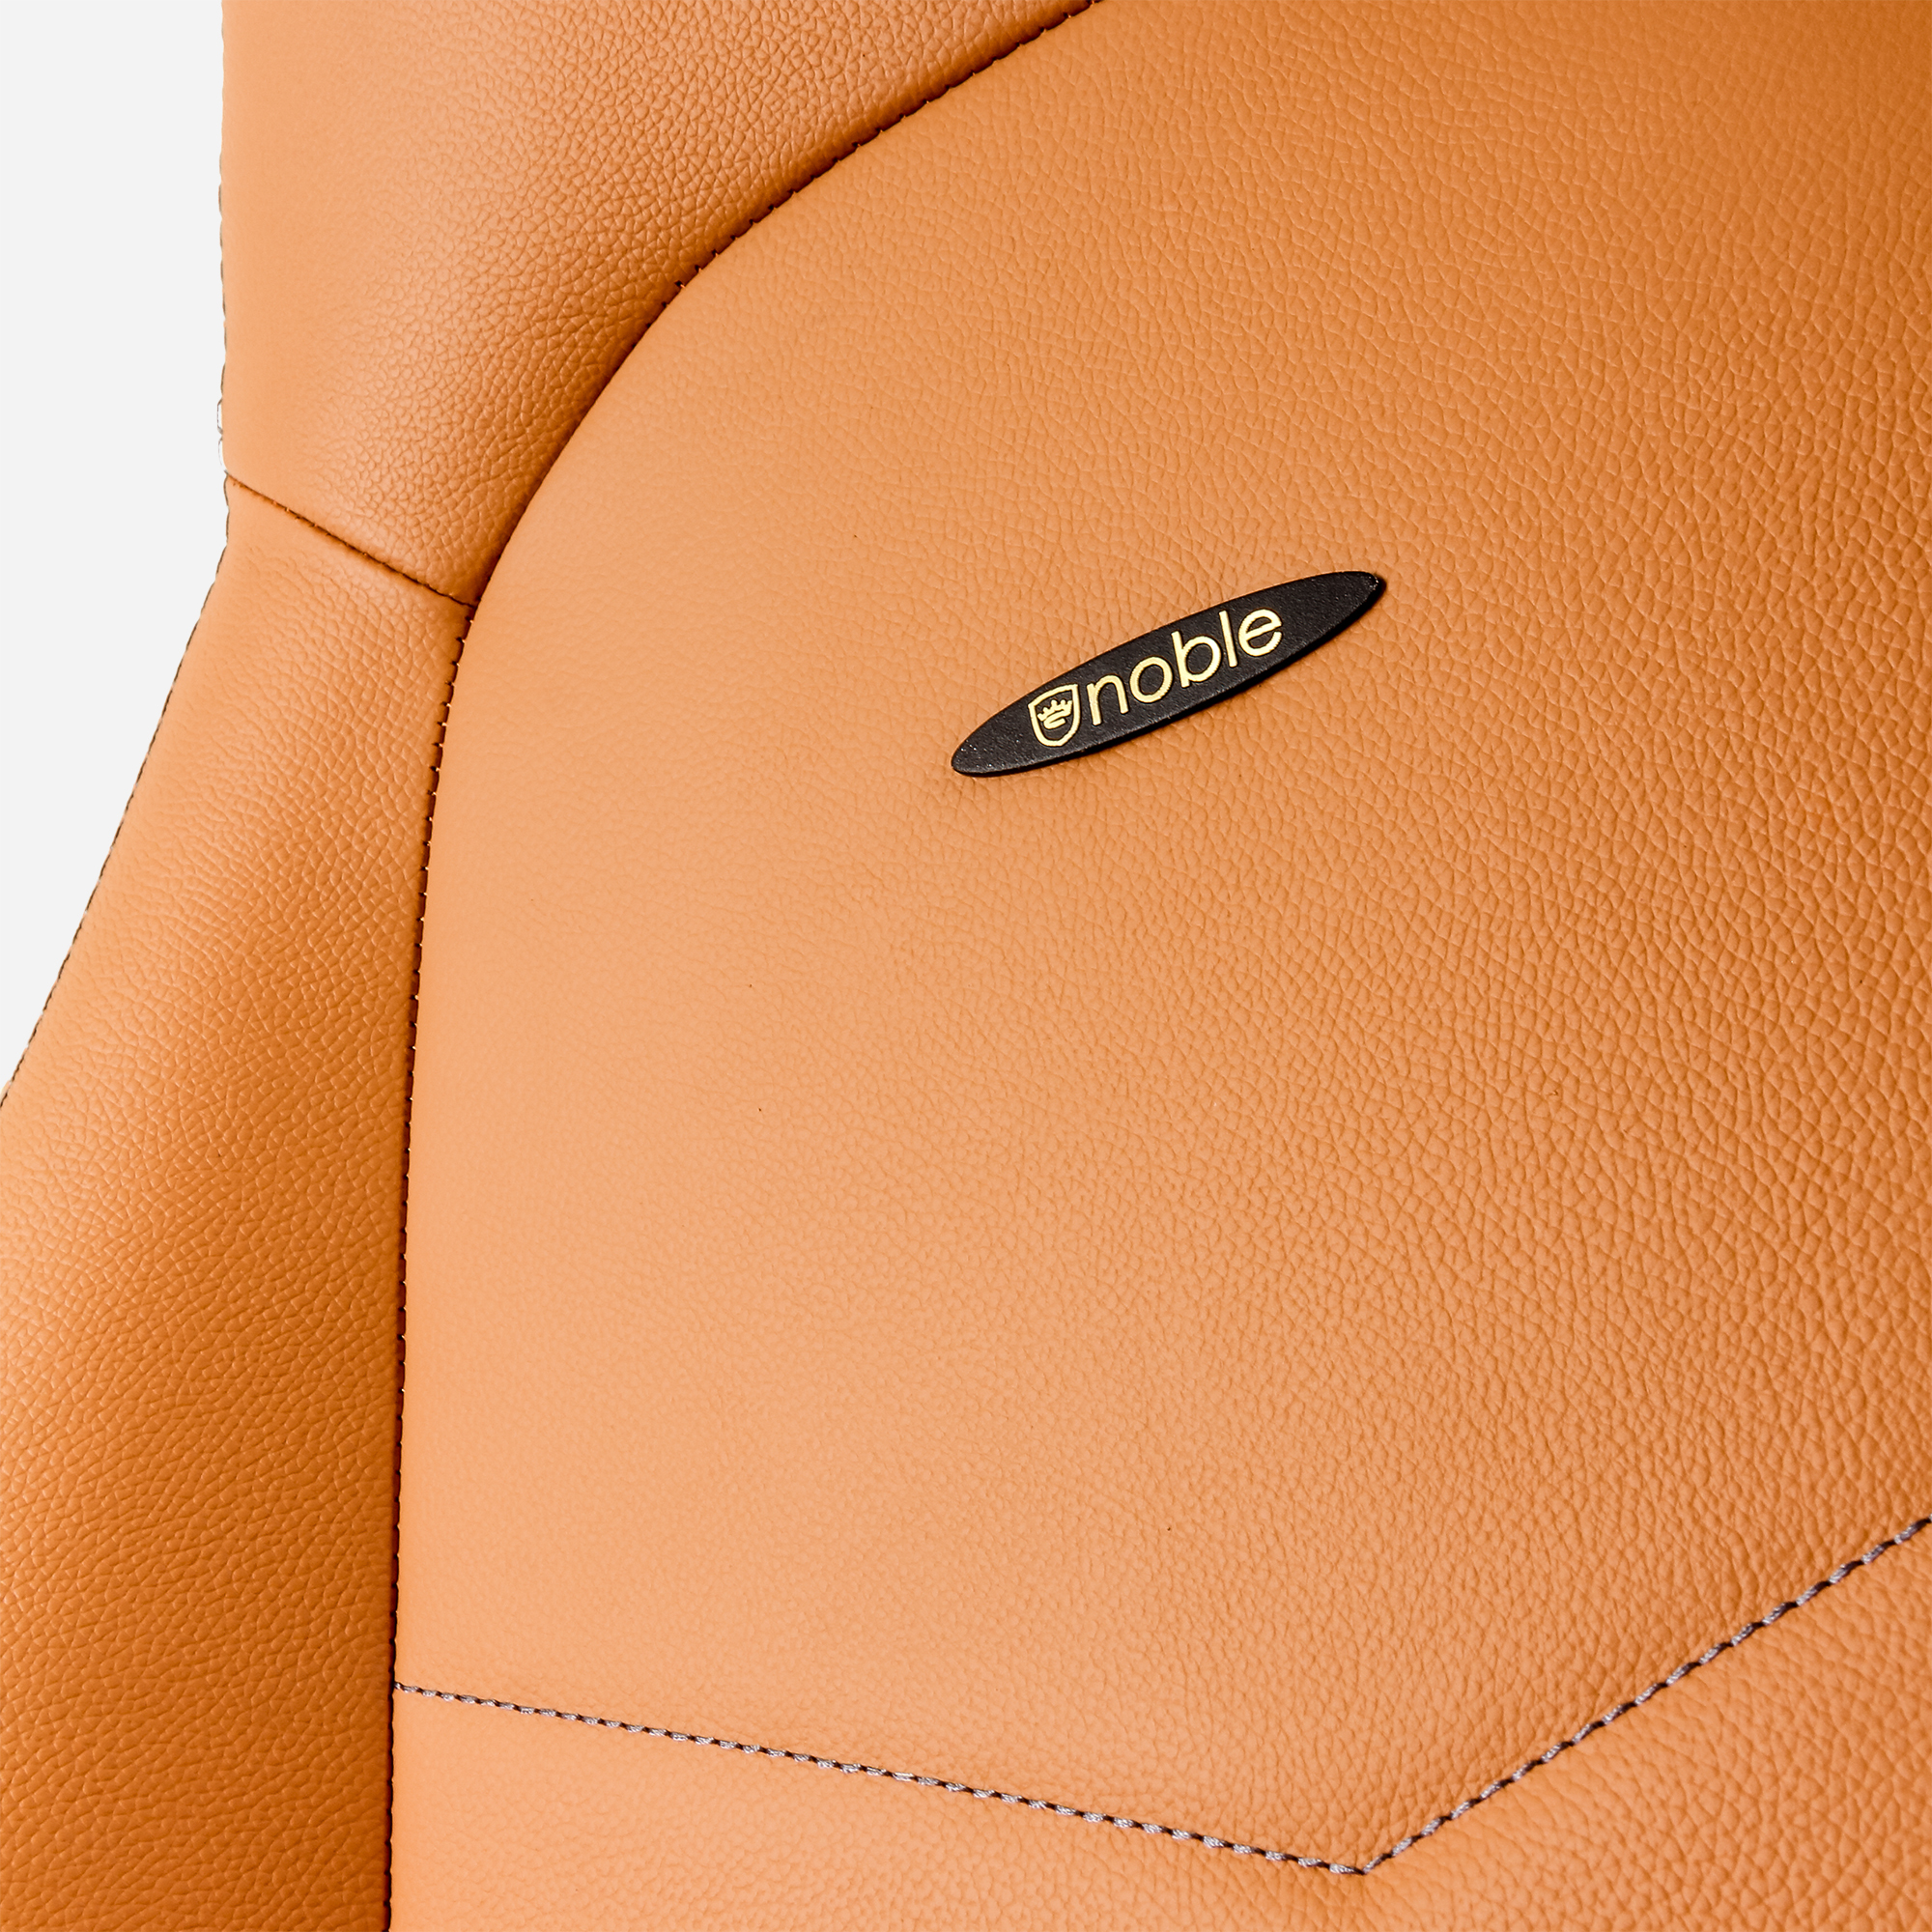 noblechairs - Cadeira noblechairs ICON Real Leather Cognac / Preto